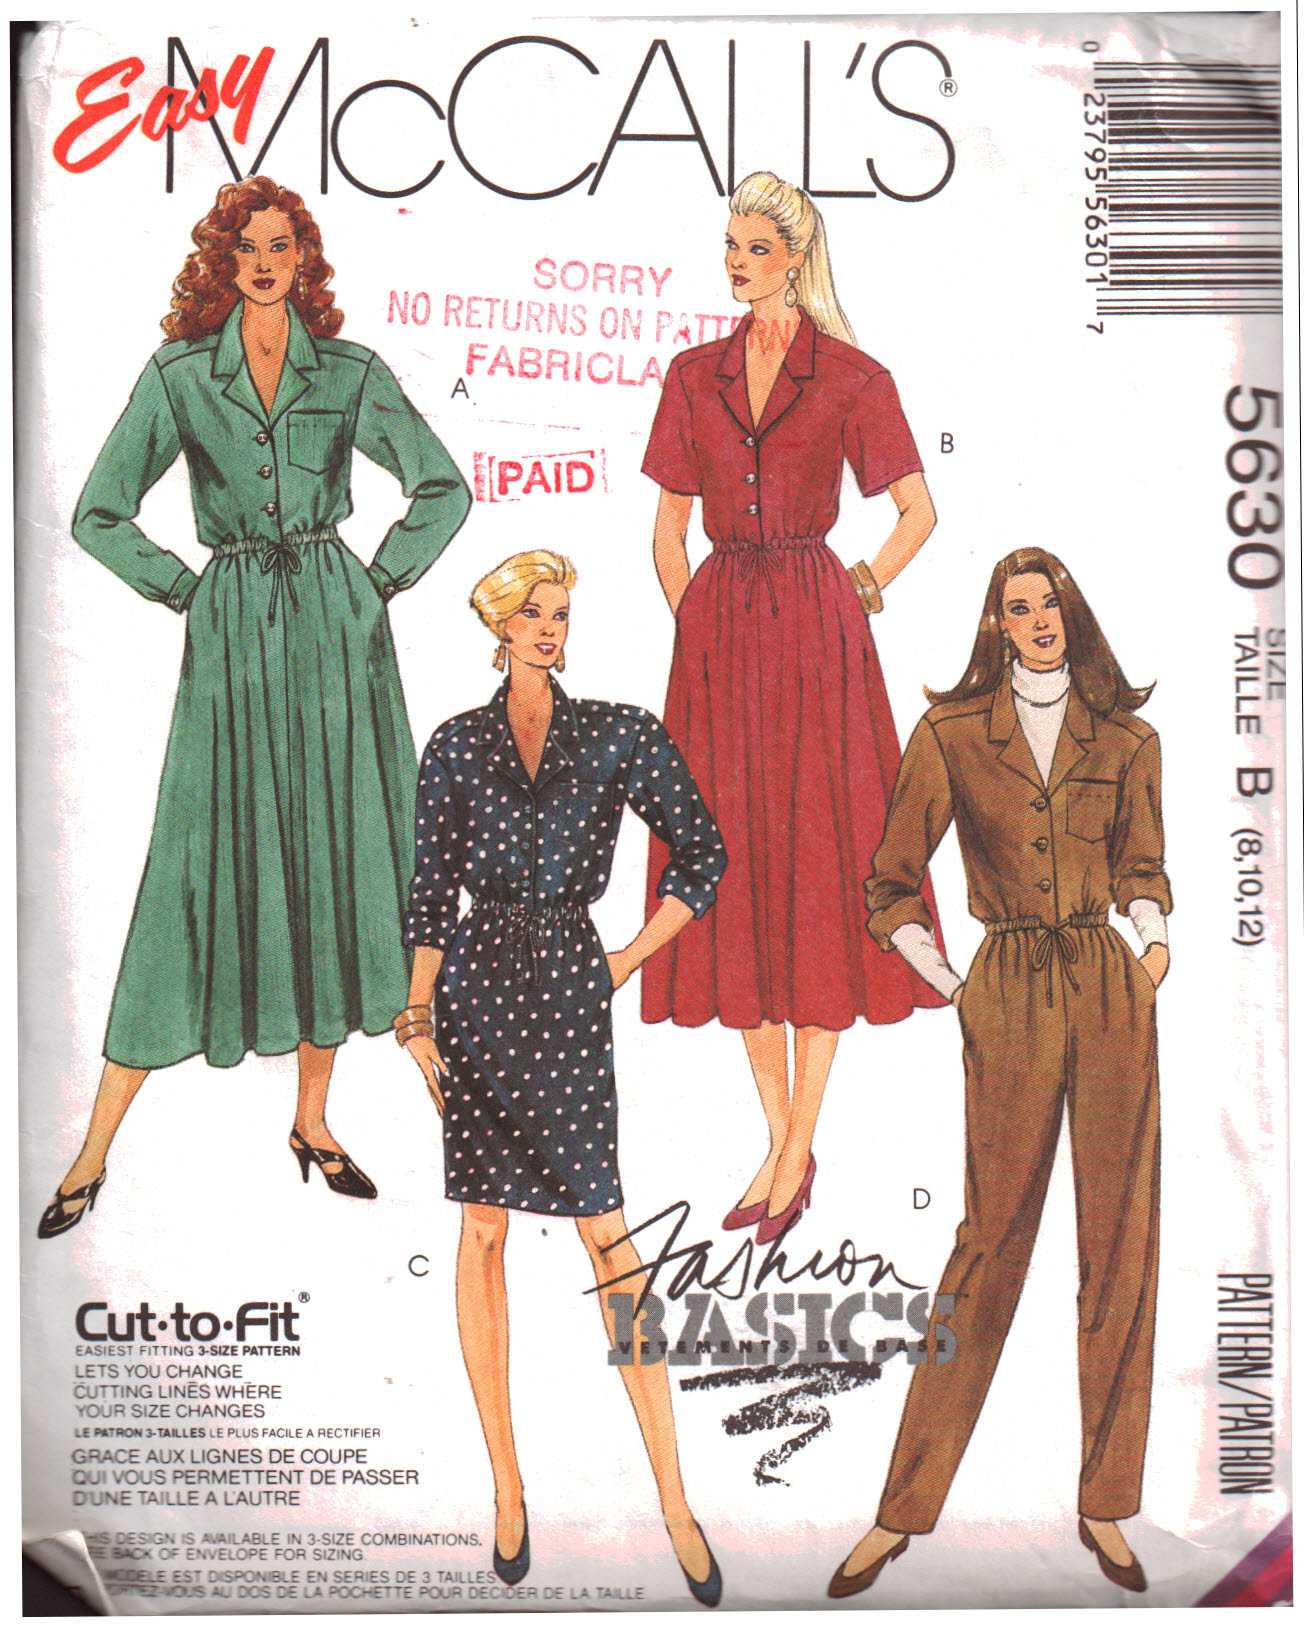 Mccalls 4977, Women 80s Fashion, Jumper Dress, Fitted Waist, Wide Straps,  Button Front, Collared Blouse, Petticoat, Size 8, UNCUT Pattern -   Canada